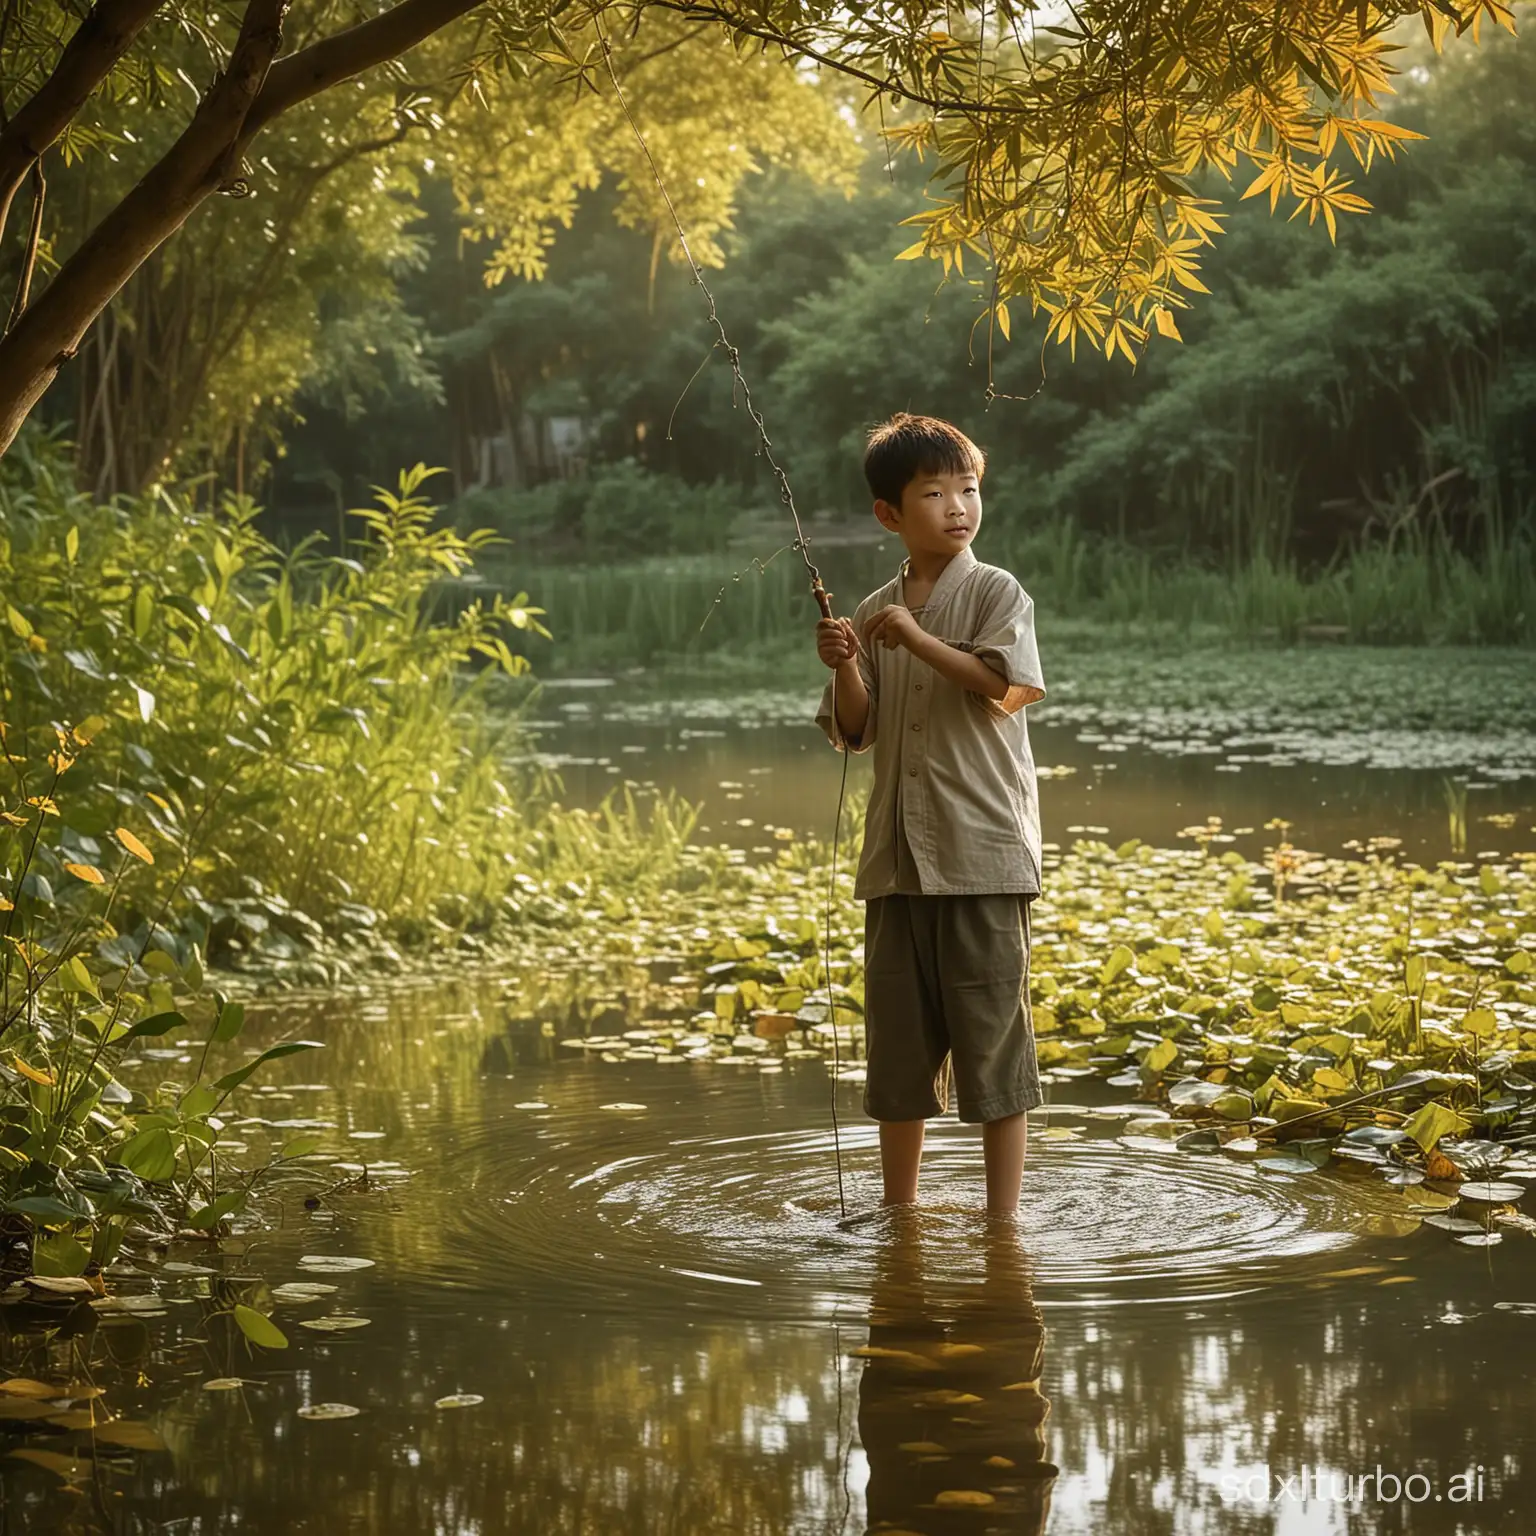 Tranquil-East-China-Countryside-Boy-Fishing-Under-Willow-Tree